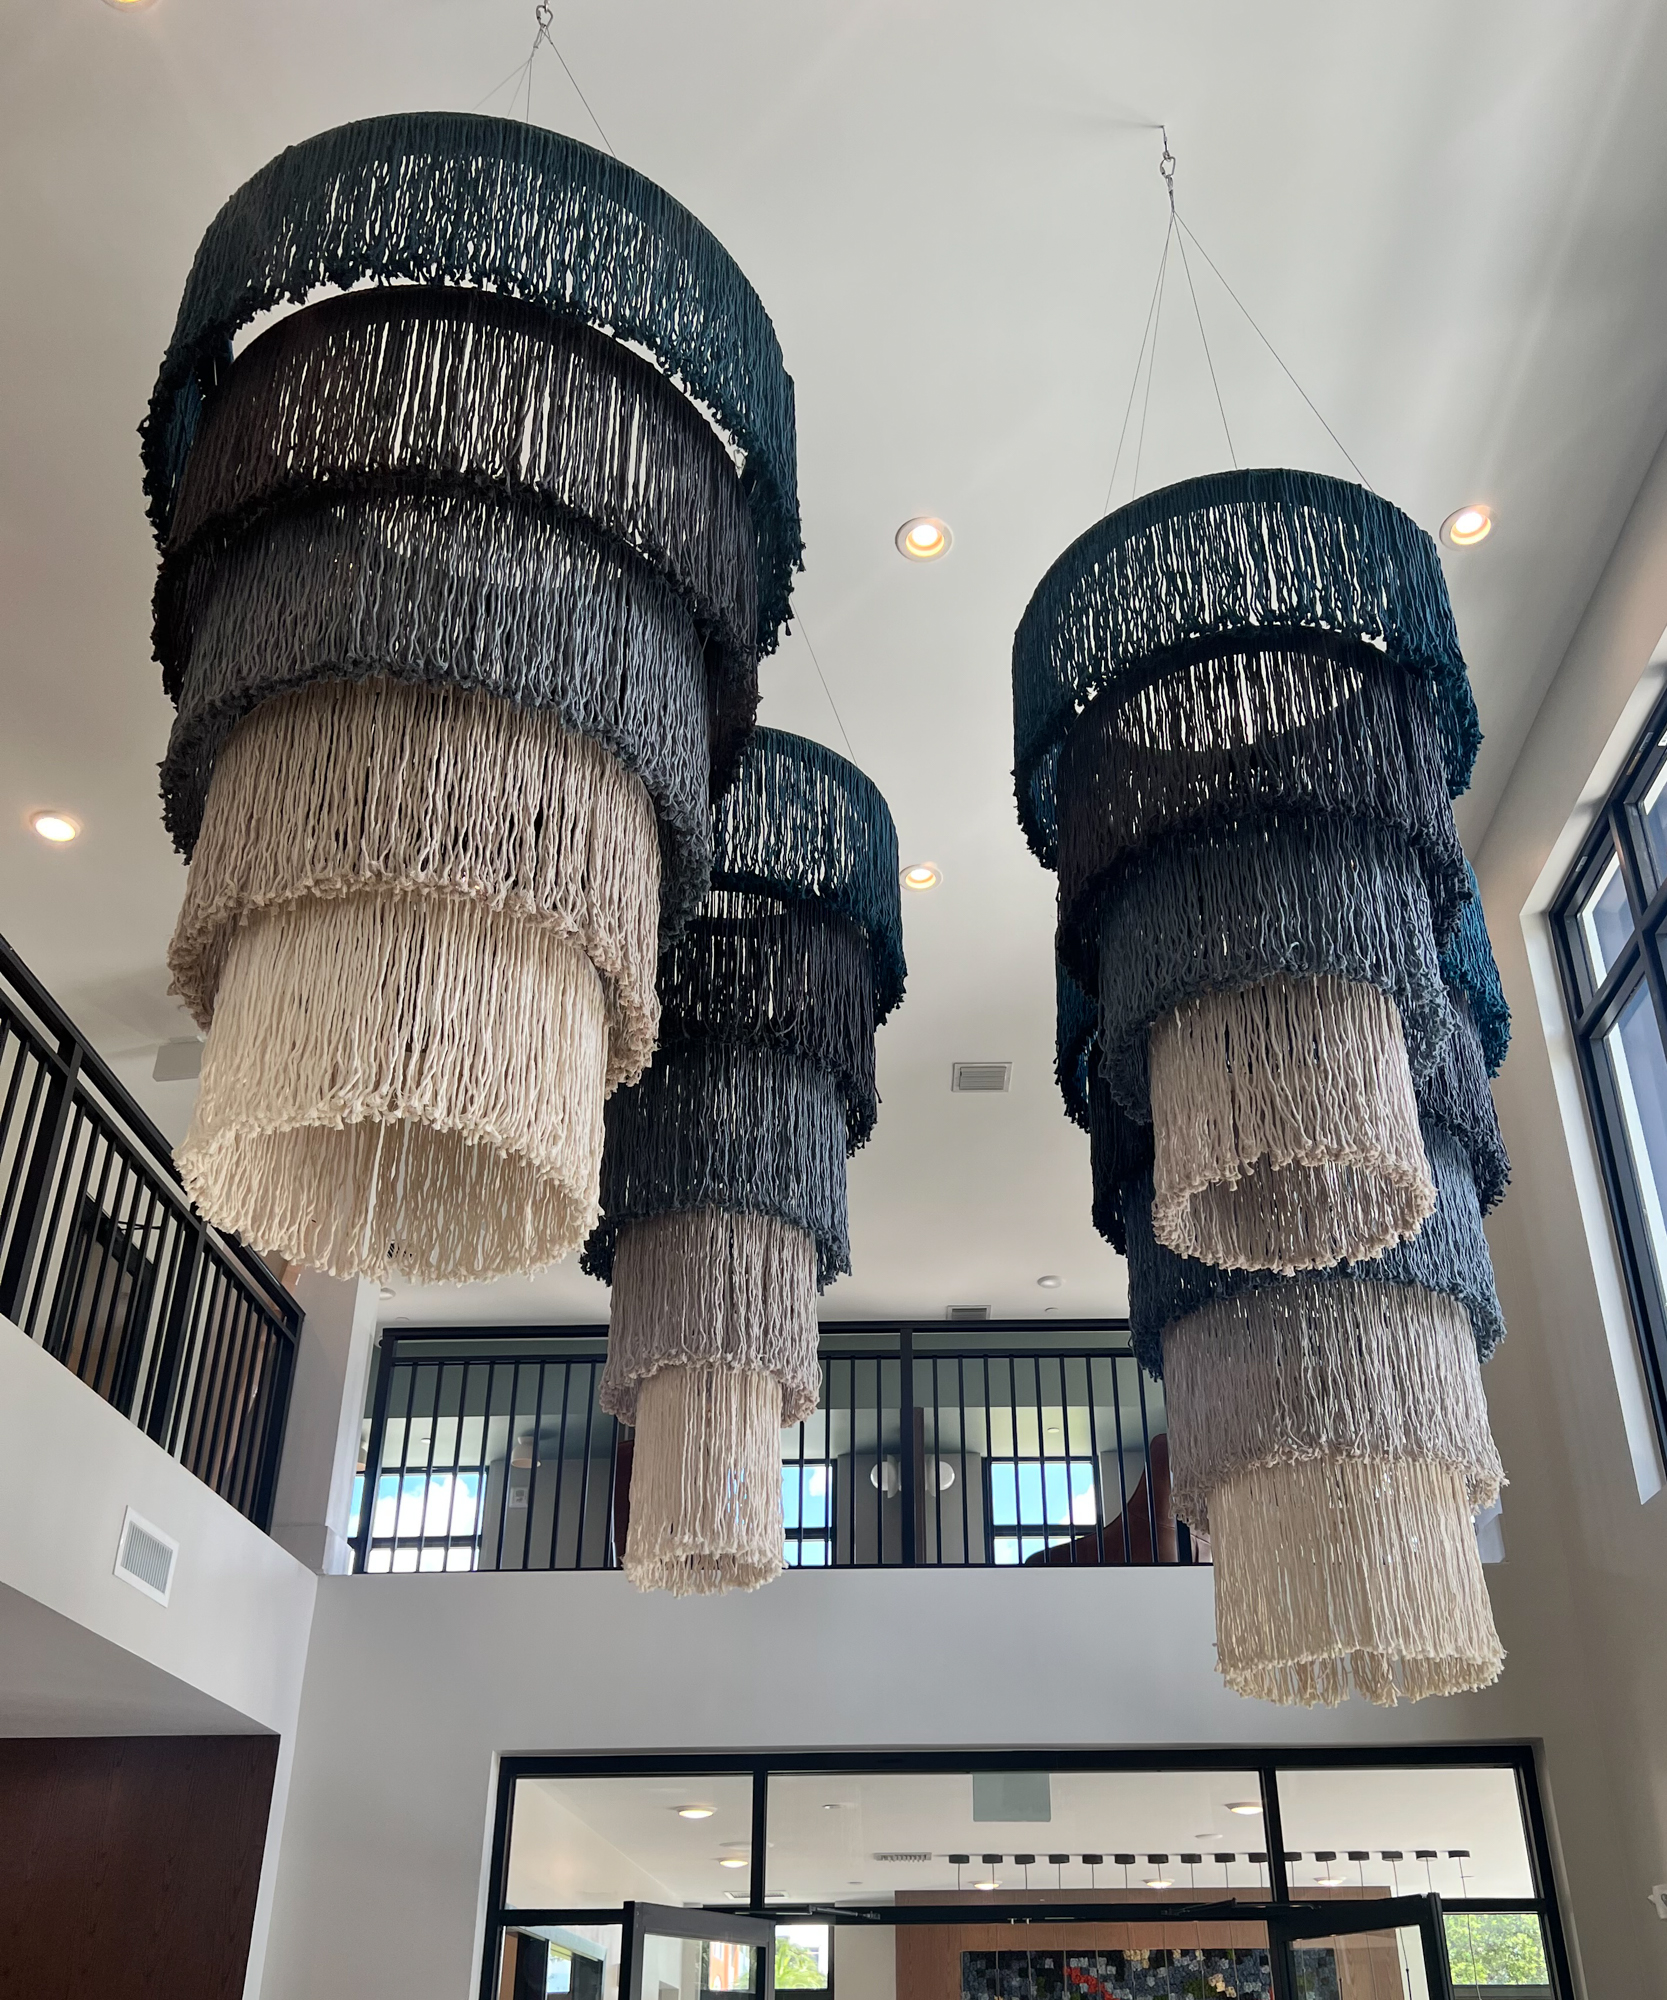 Installation view of large scale suspended string art sculptures in lobby space